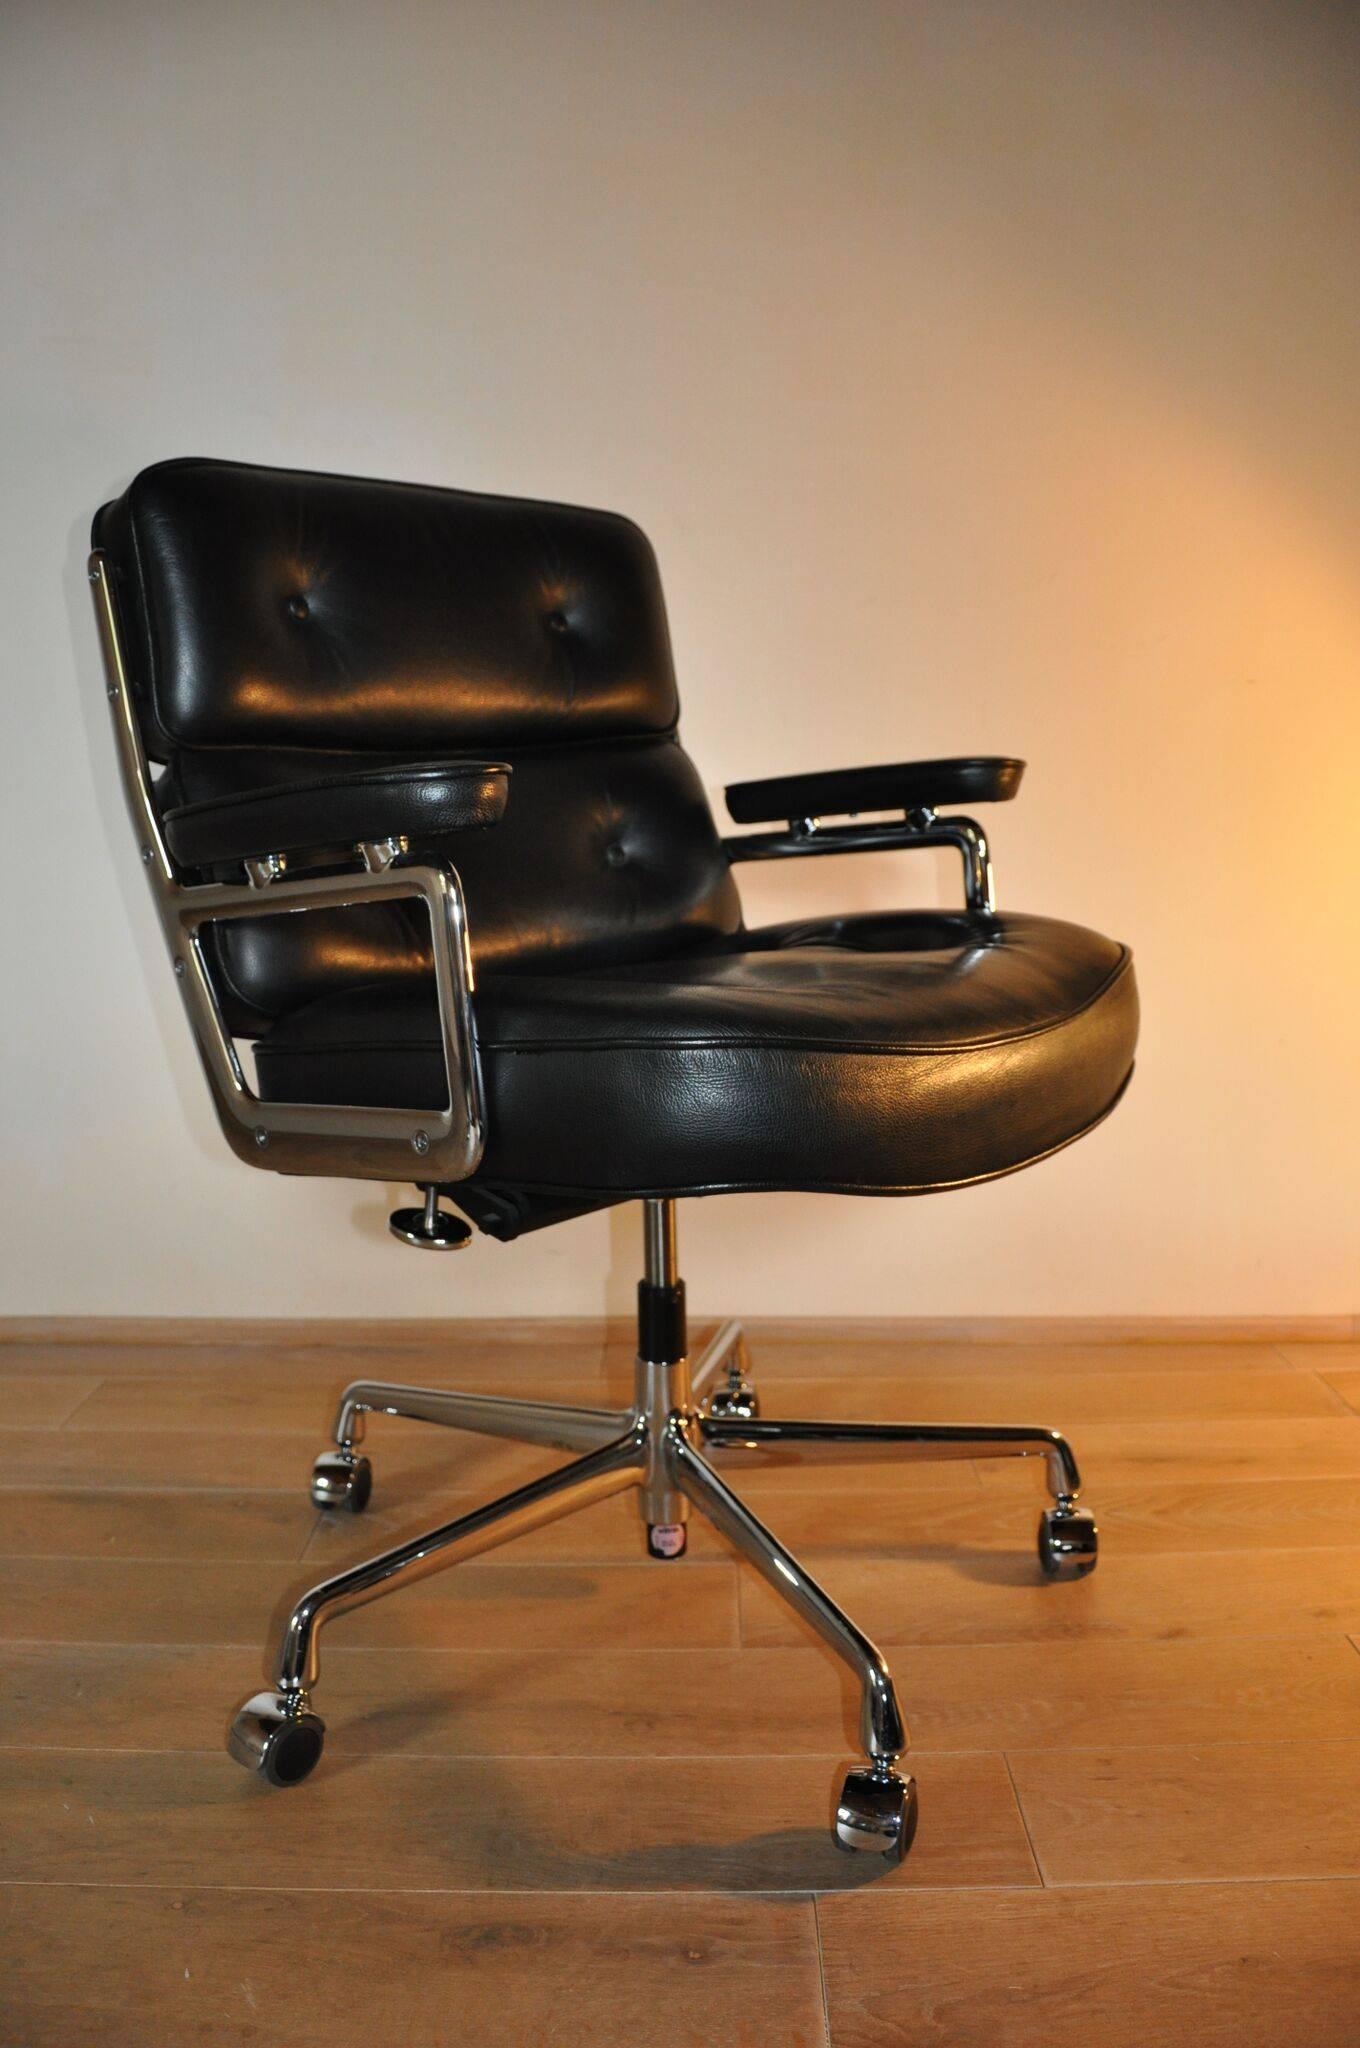 Lobby chair ES104, Charles and Ray Eames, 1960
Height-adjustable swivel conference chair with five-spoke base (castors) and armrests. Originally designed to furnish the lobby areas of New York city’s Time and Life building.
It consists of three